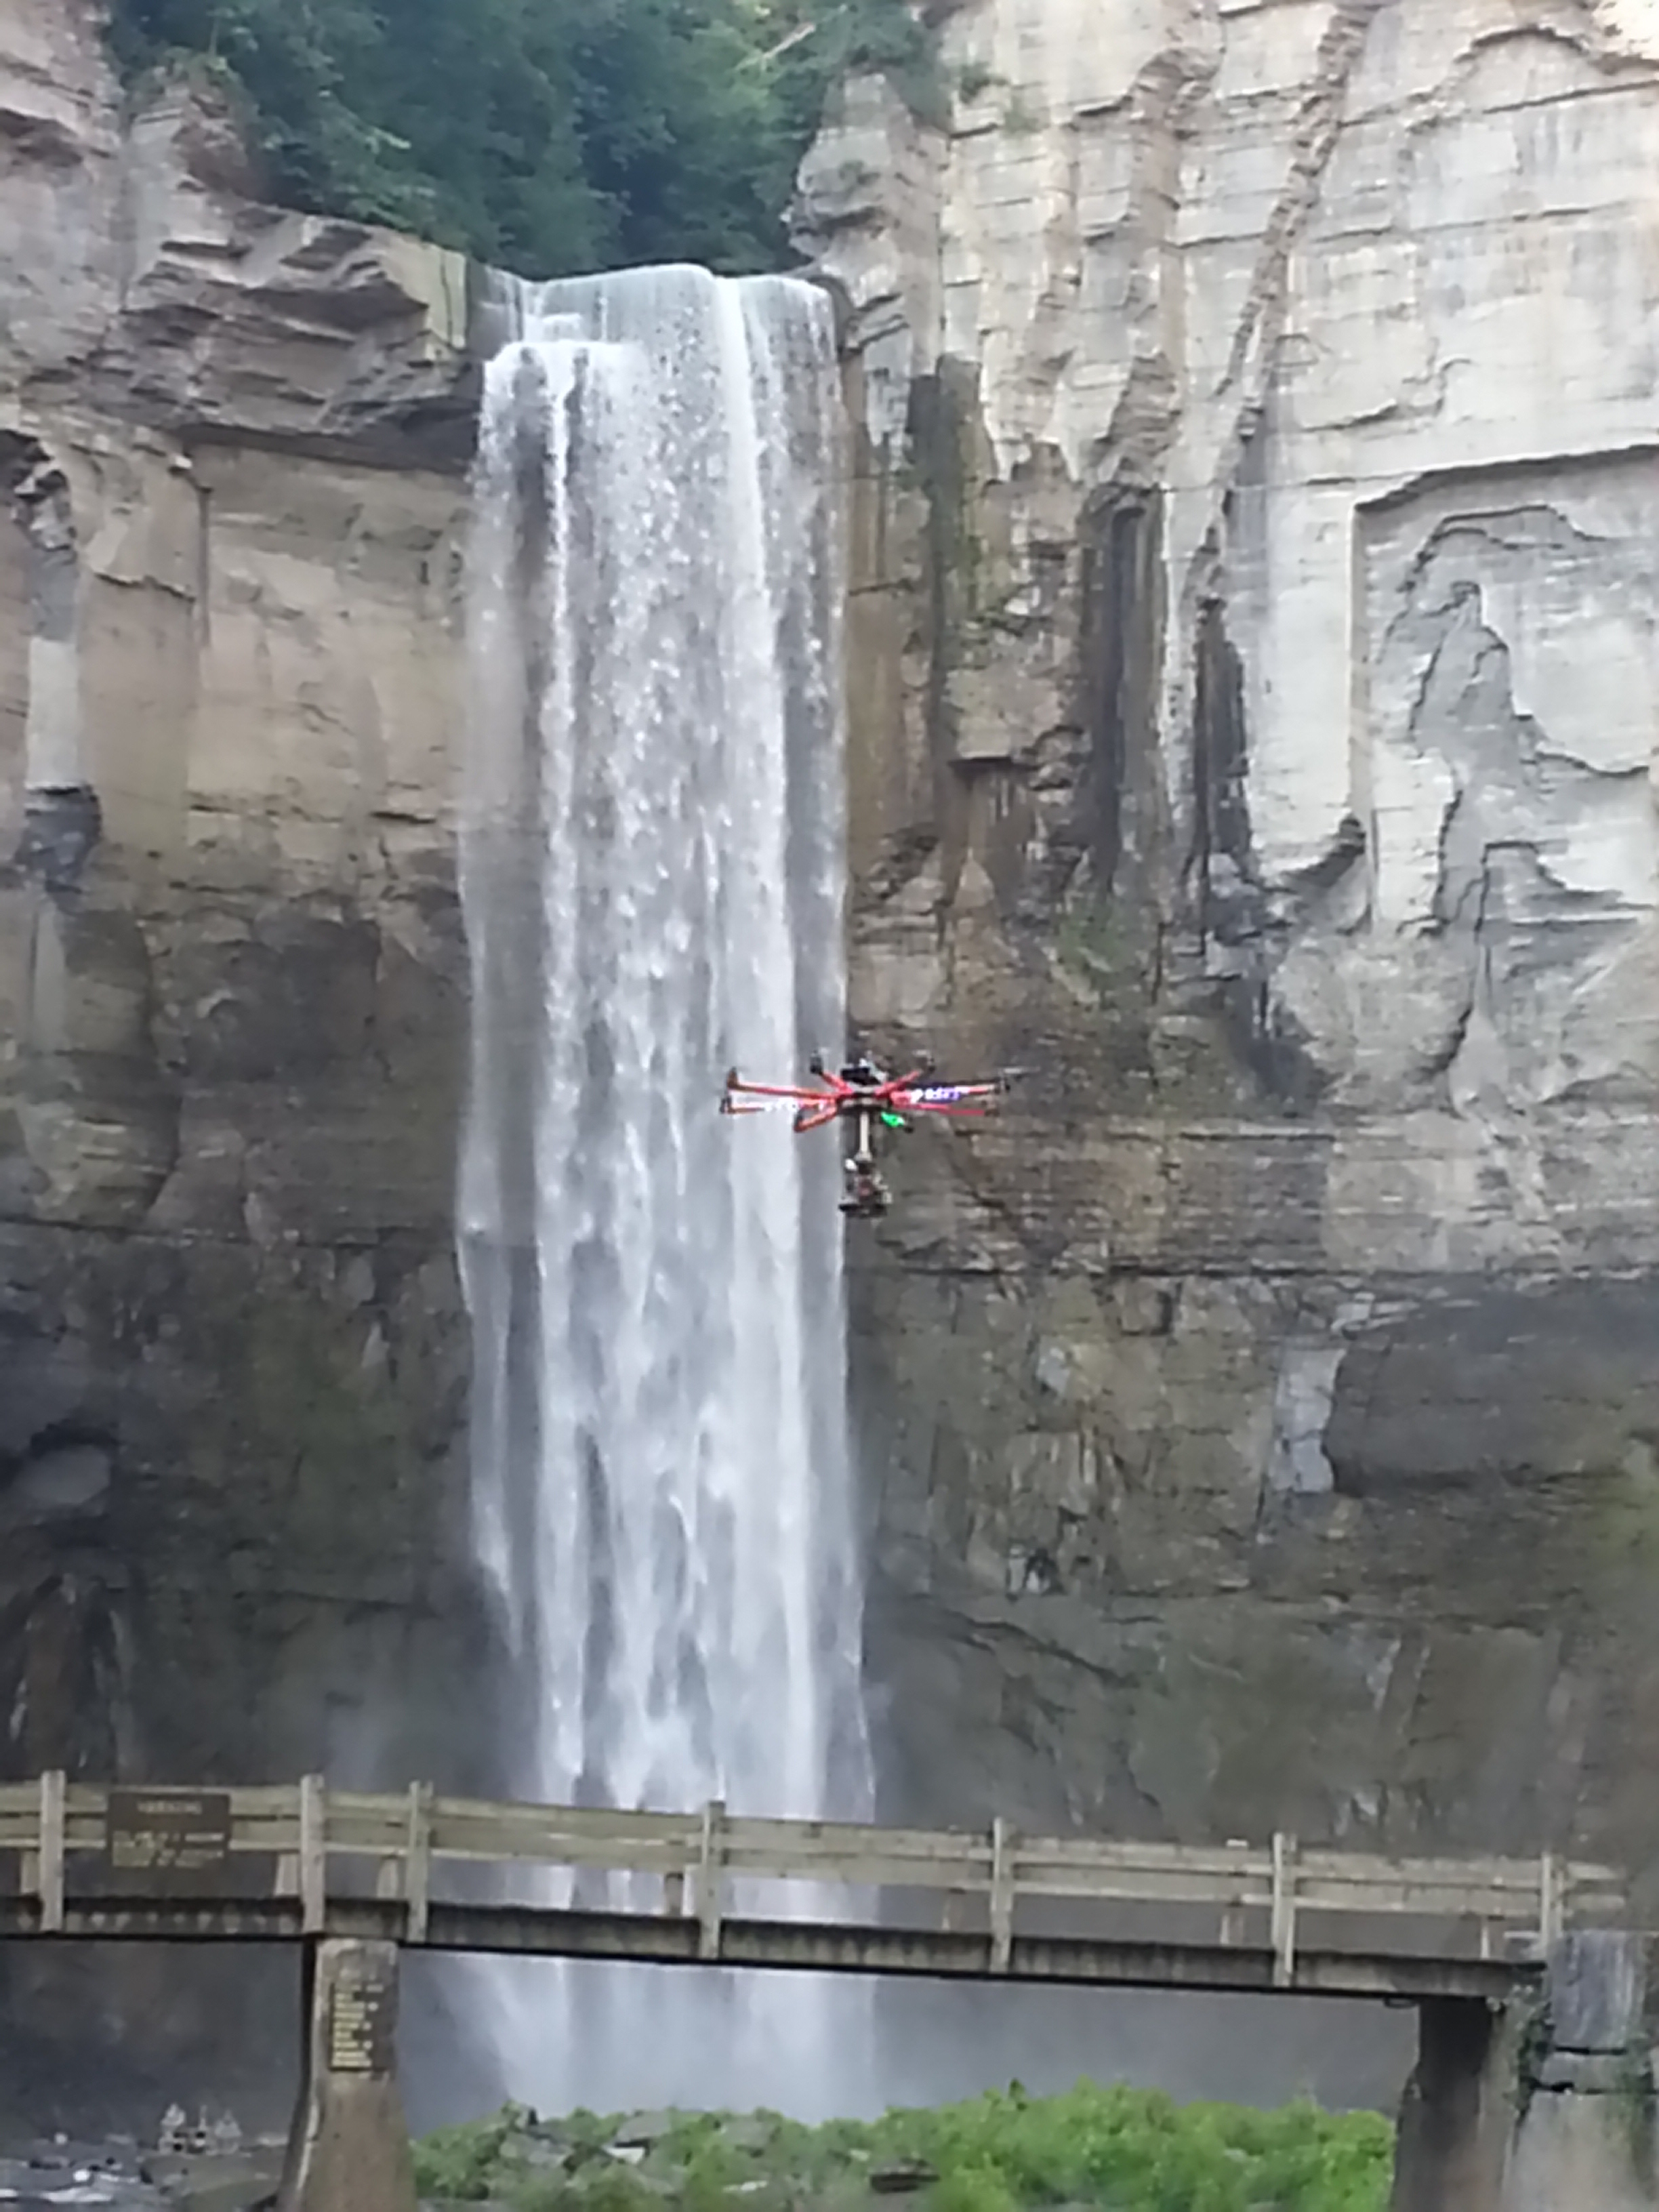 Octocopter with Panasonic GH 4 capturing Waterfall in Ithaca, NY for Cornell University